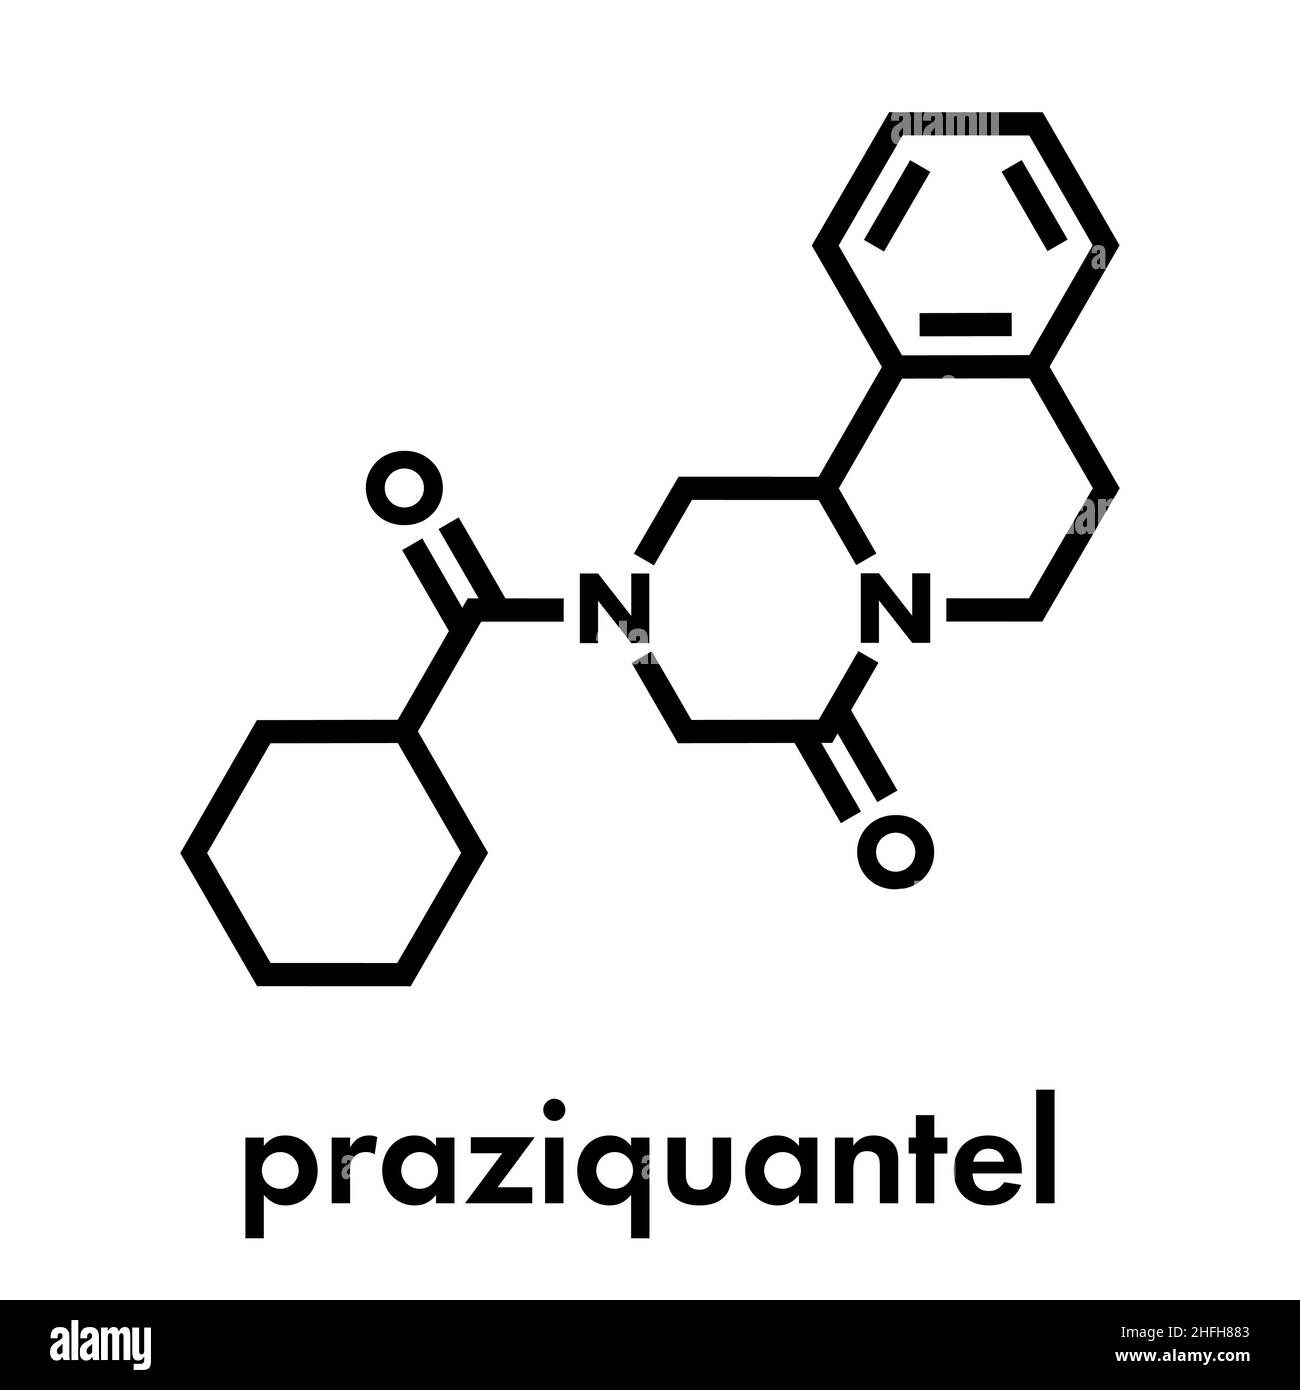 Praziquantel anthelmintic drug molecule. Used to treat tapeworm infections. Skeletal formula. Stock Vector